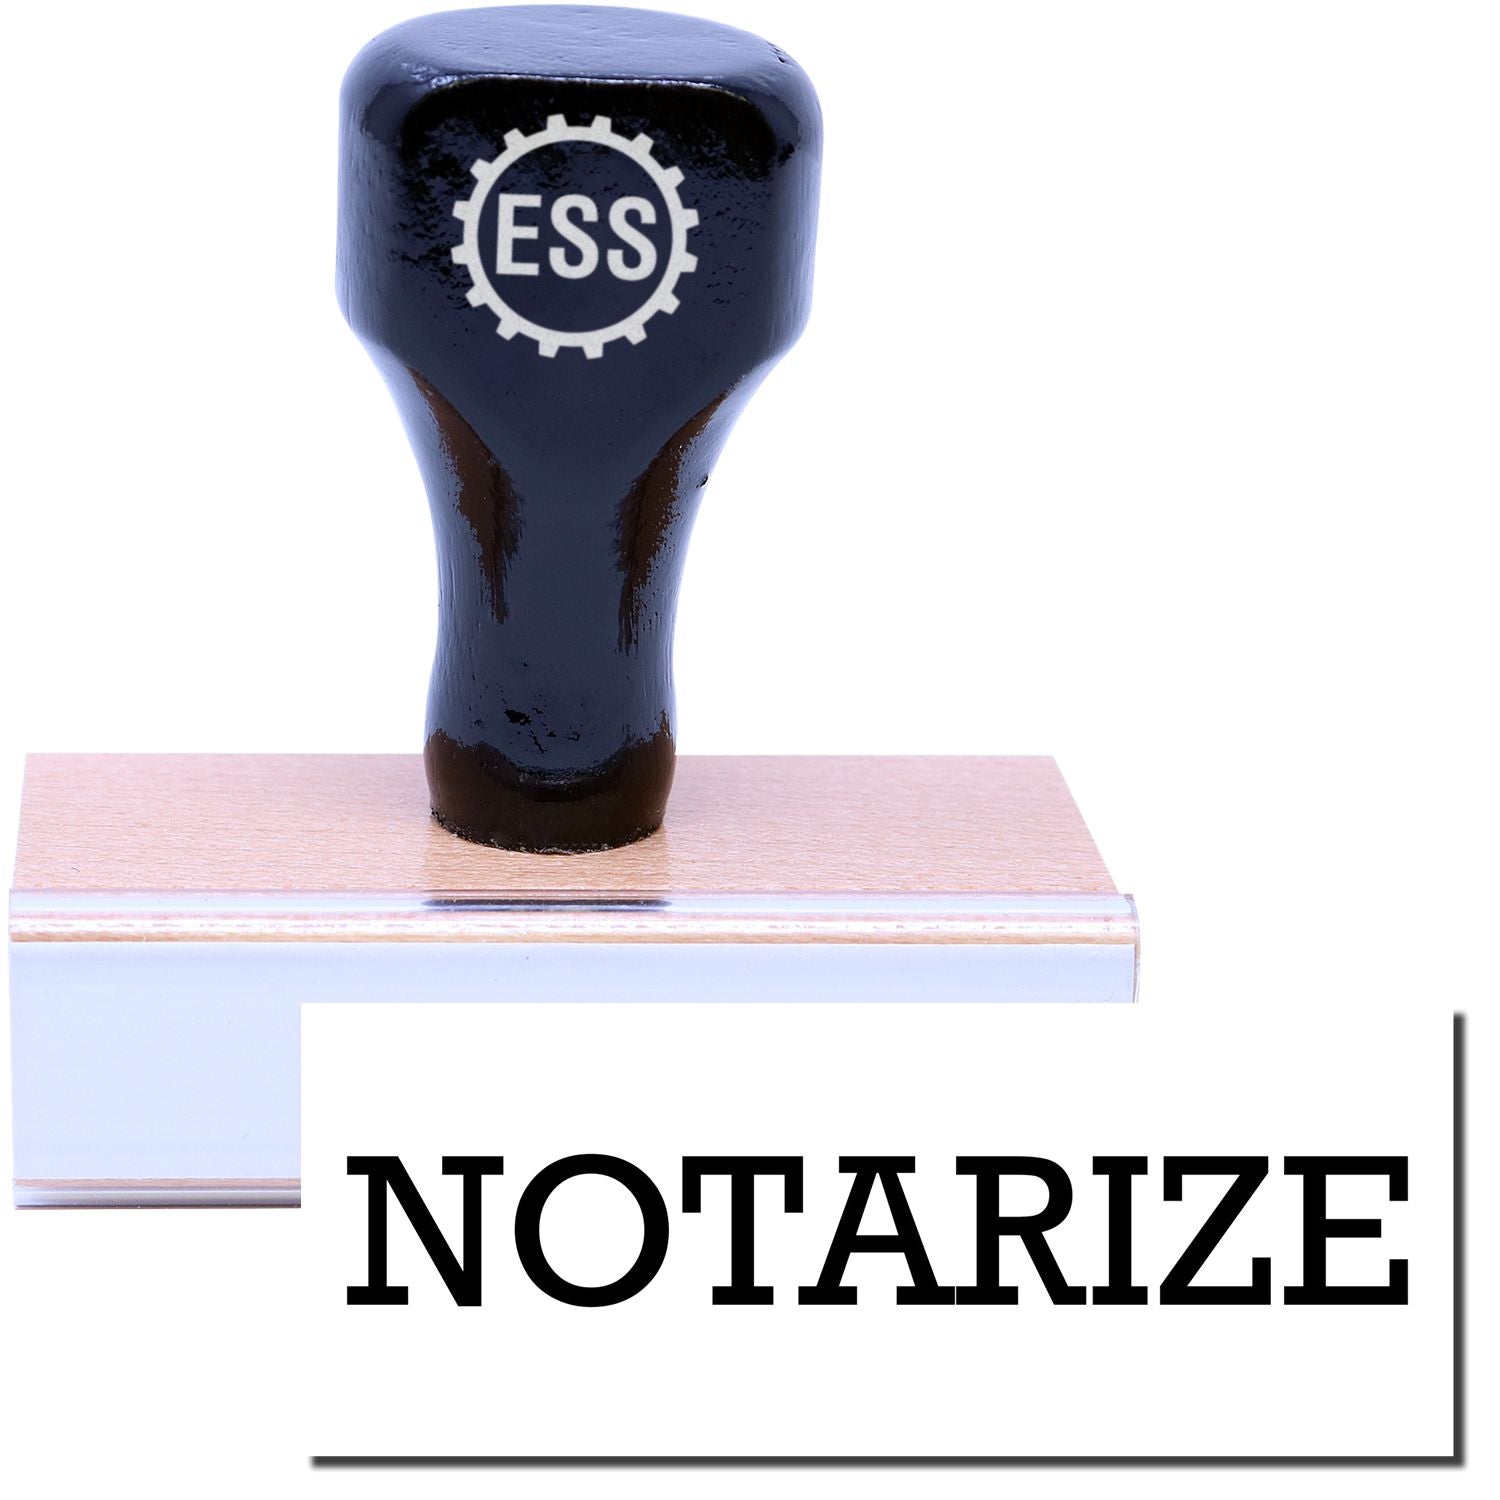 A stock office rubber stamp with a stamped image showing how the text "NOTARIZE" is displayed after stamping.